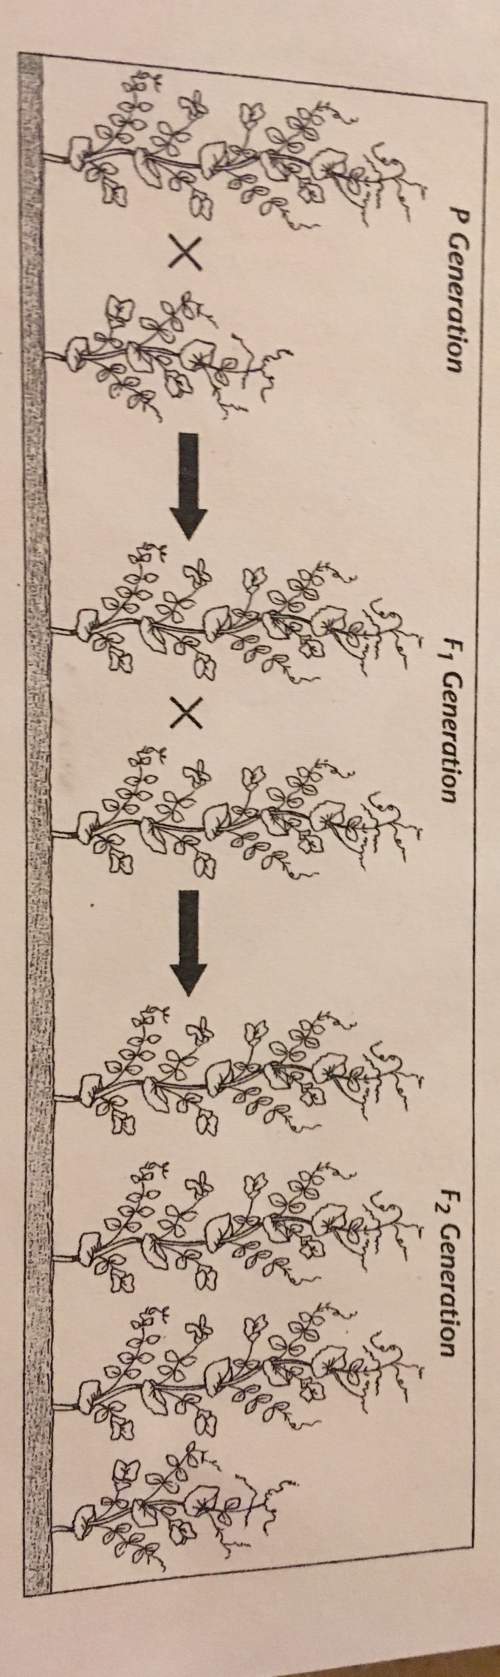 What trait in pea plants is being studied in the cross shown above?